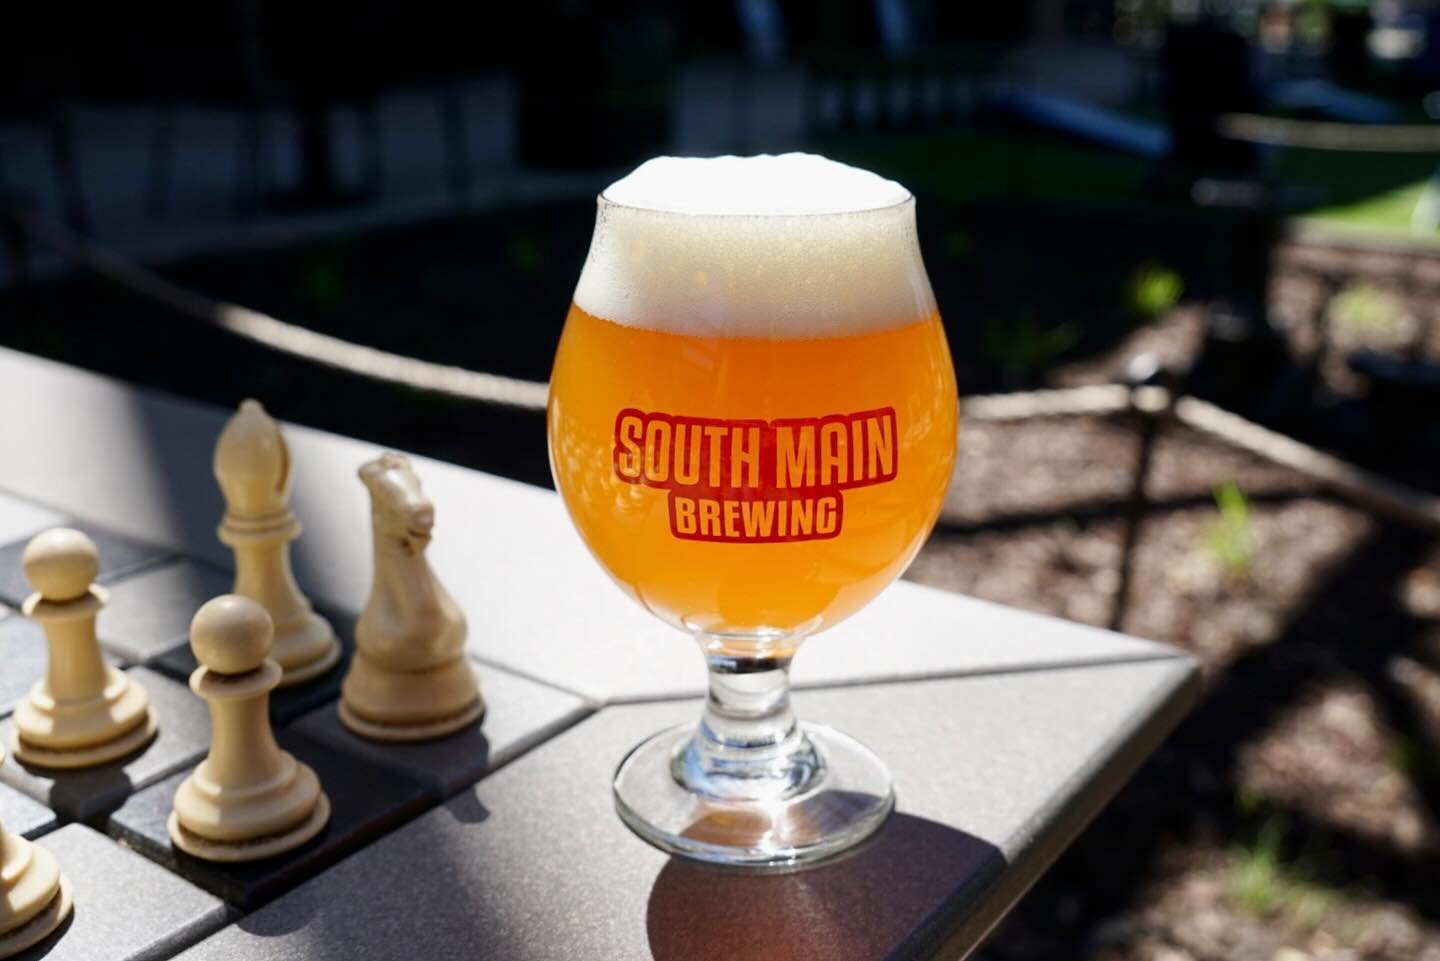 Trivia Night tonight at 6pm, cold beer on tap, it&rsquo;s almost summer vacation&hellip; need I go on? There&rsquo;s so much to be excited about today! Come have a drink with us. 

#coldbeer #trivianight #summertime #localbeer #drinklocalga #oconeeco